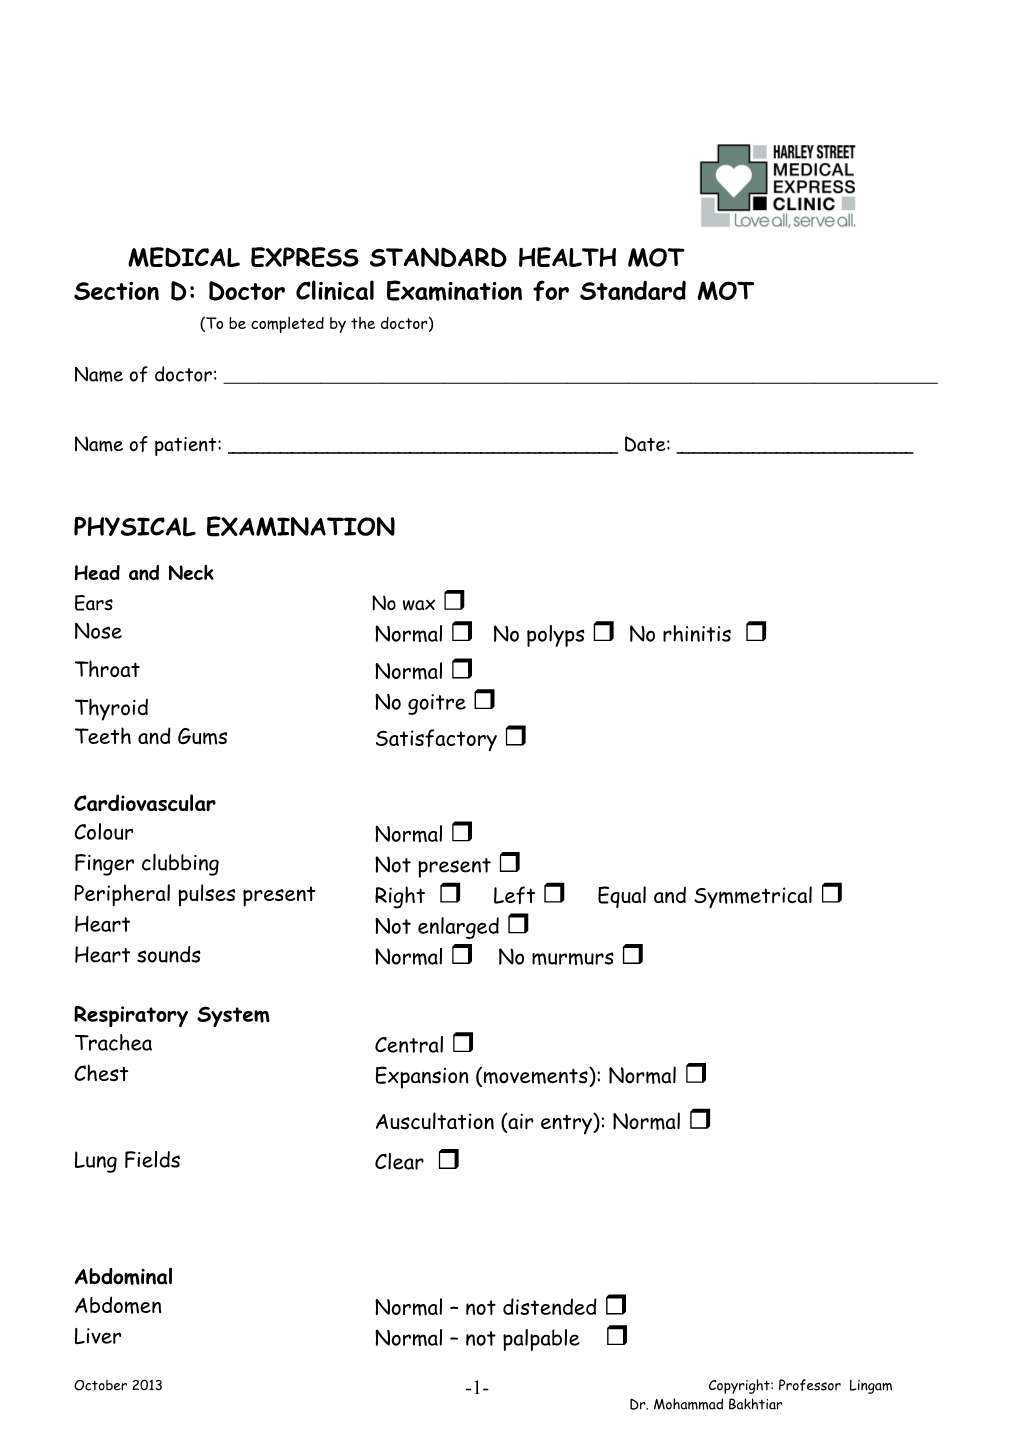 Section D: Doctor Clinical Examination for Standard MOT